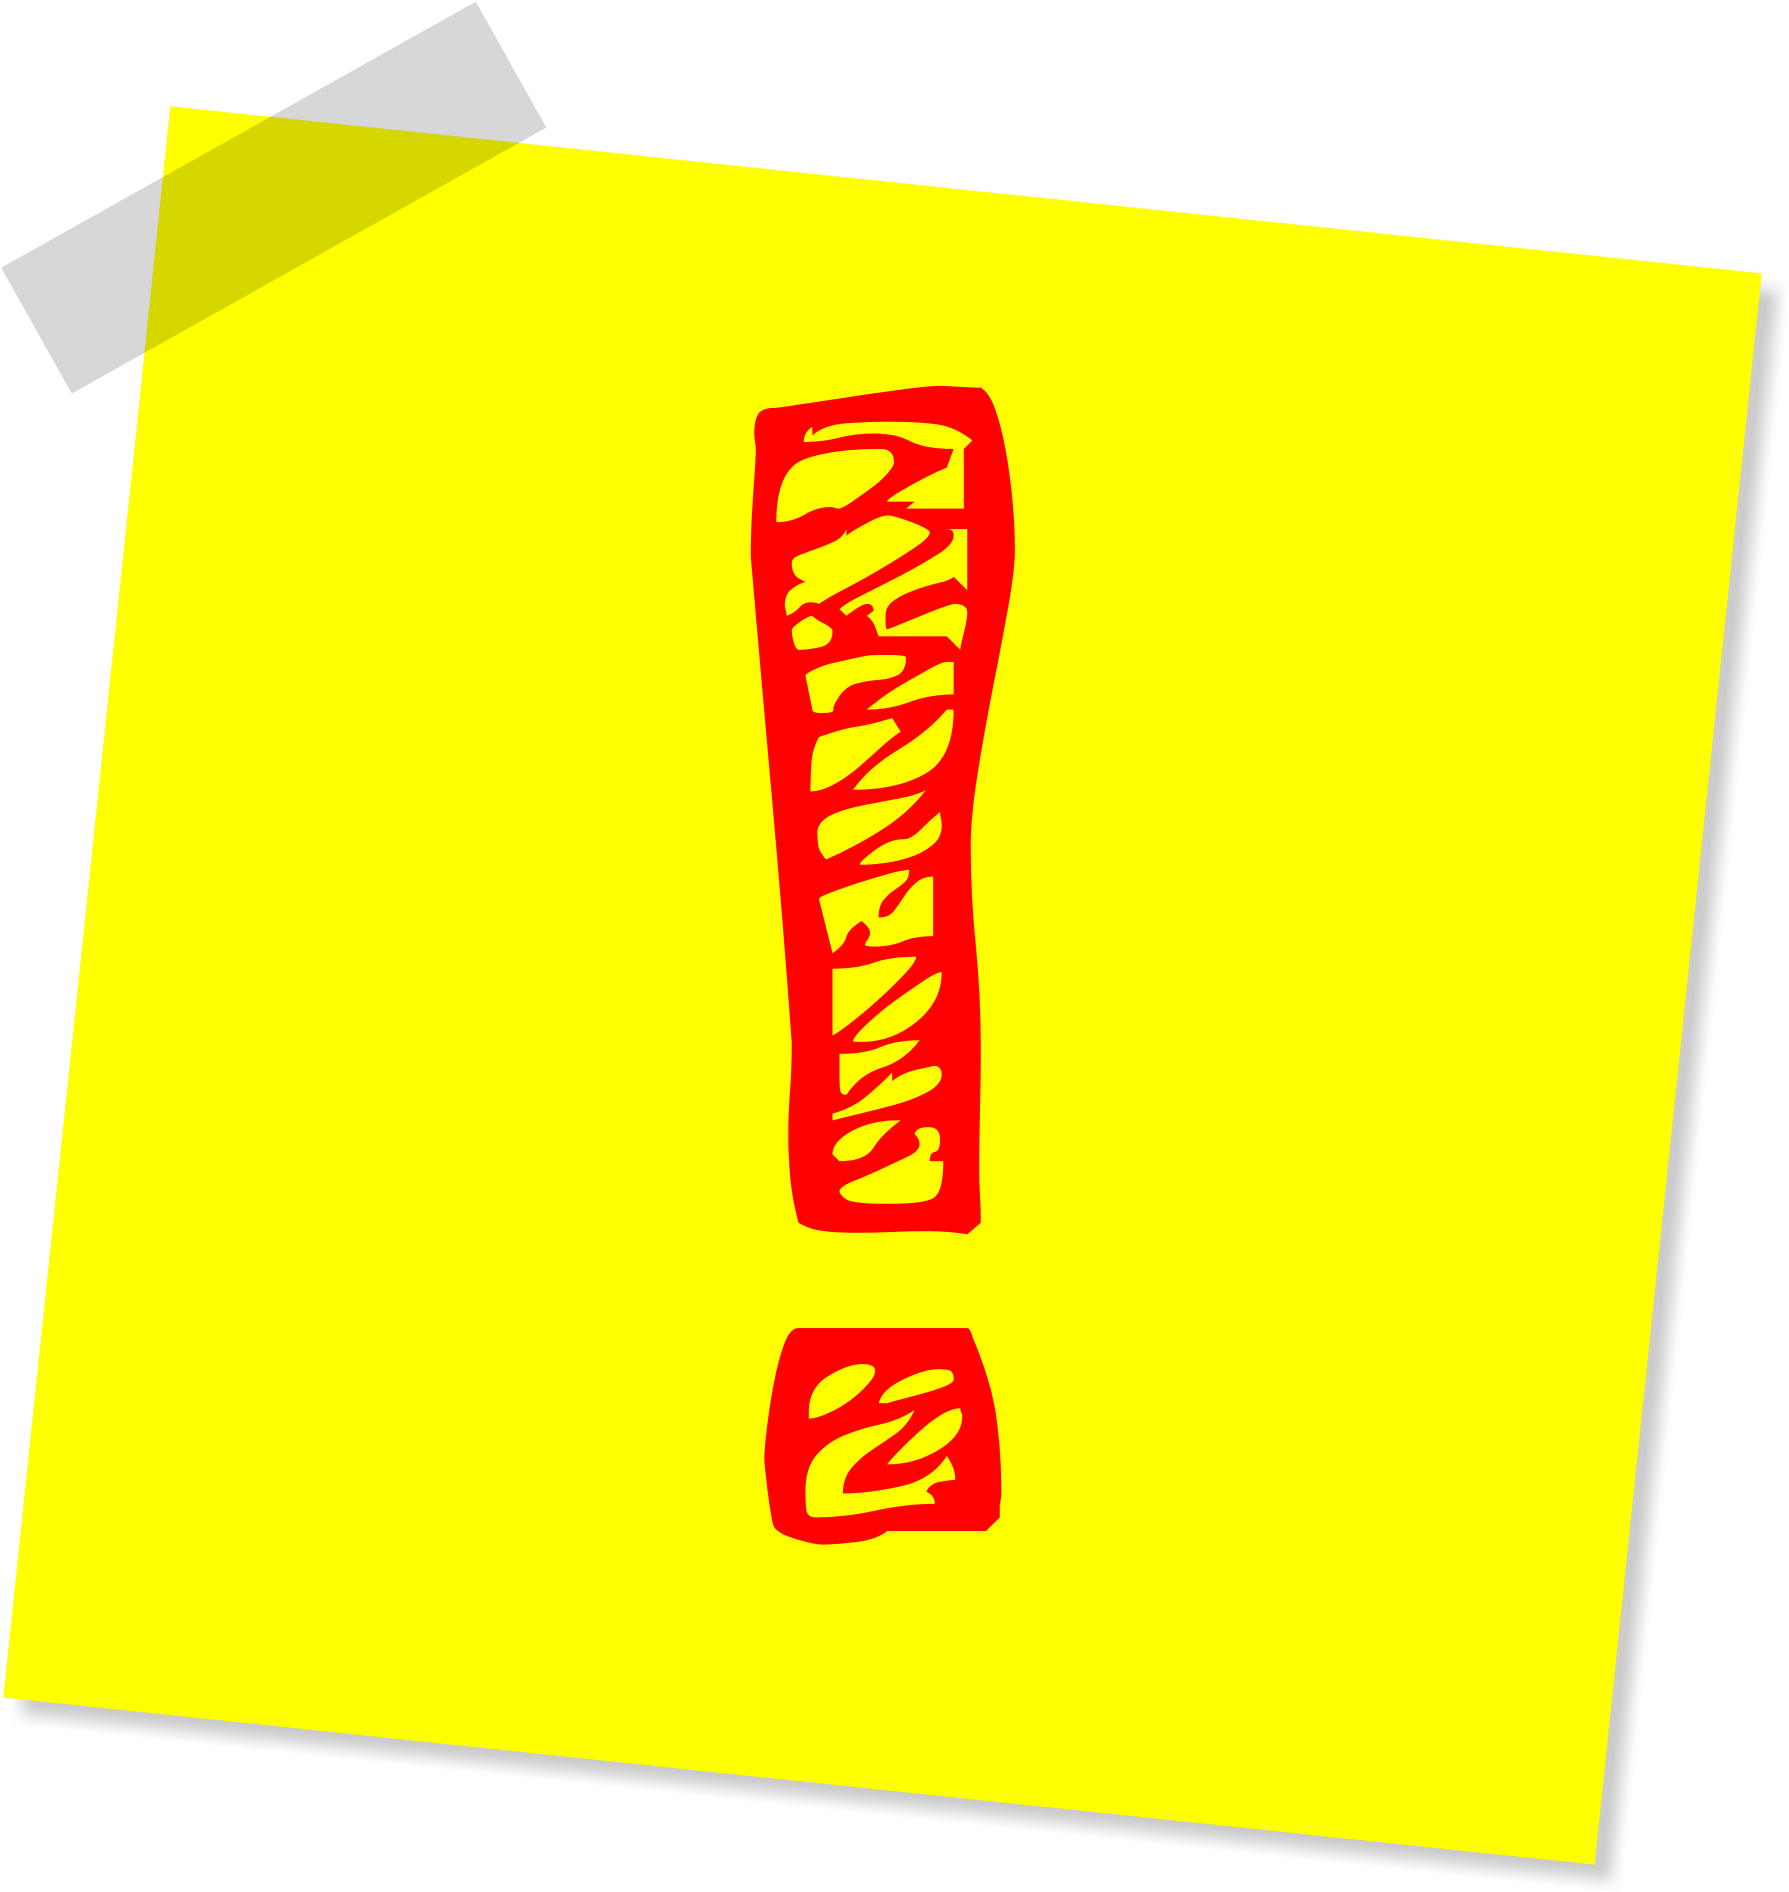 A Yellow Square With A Red Exclamation Mark